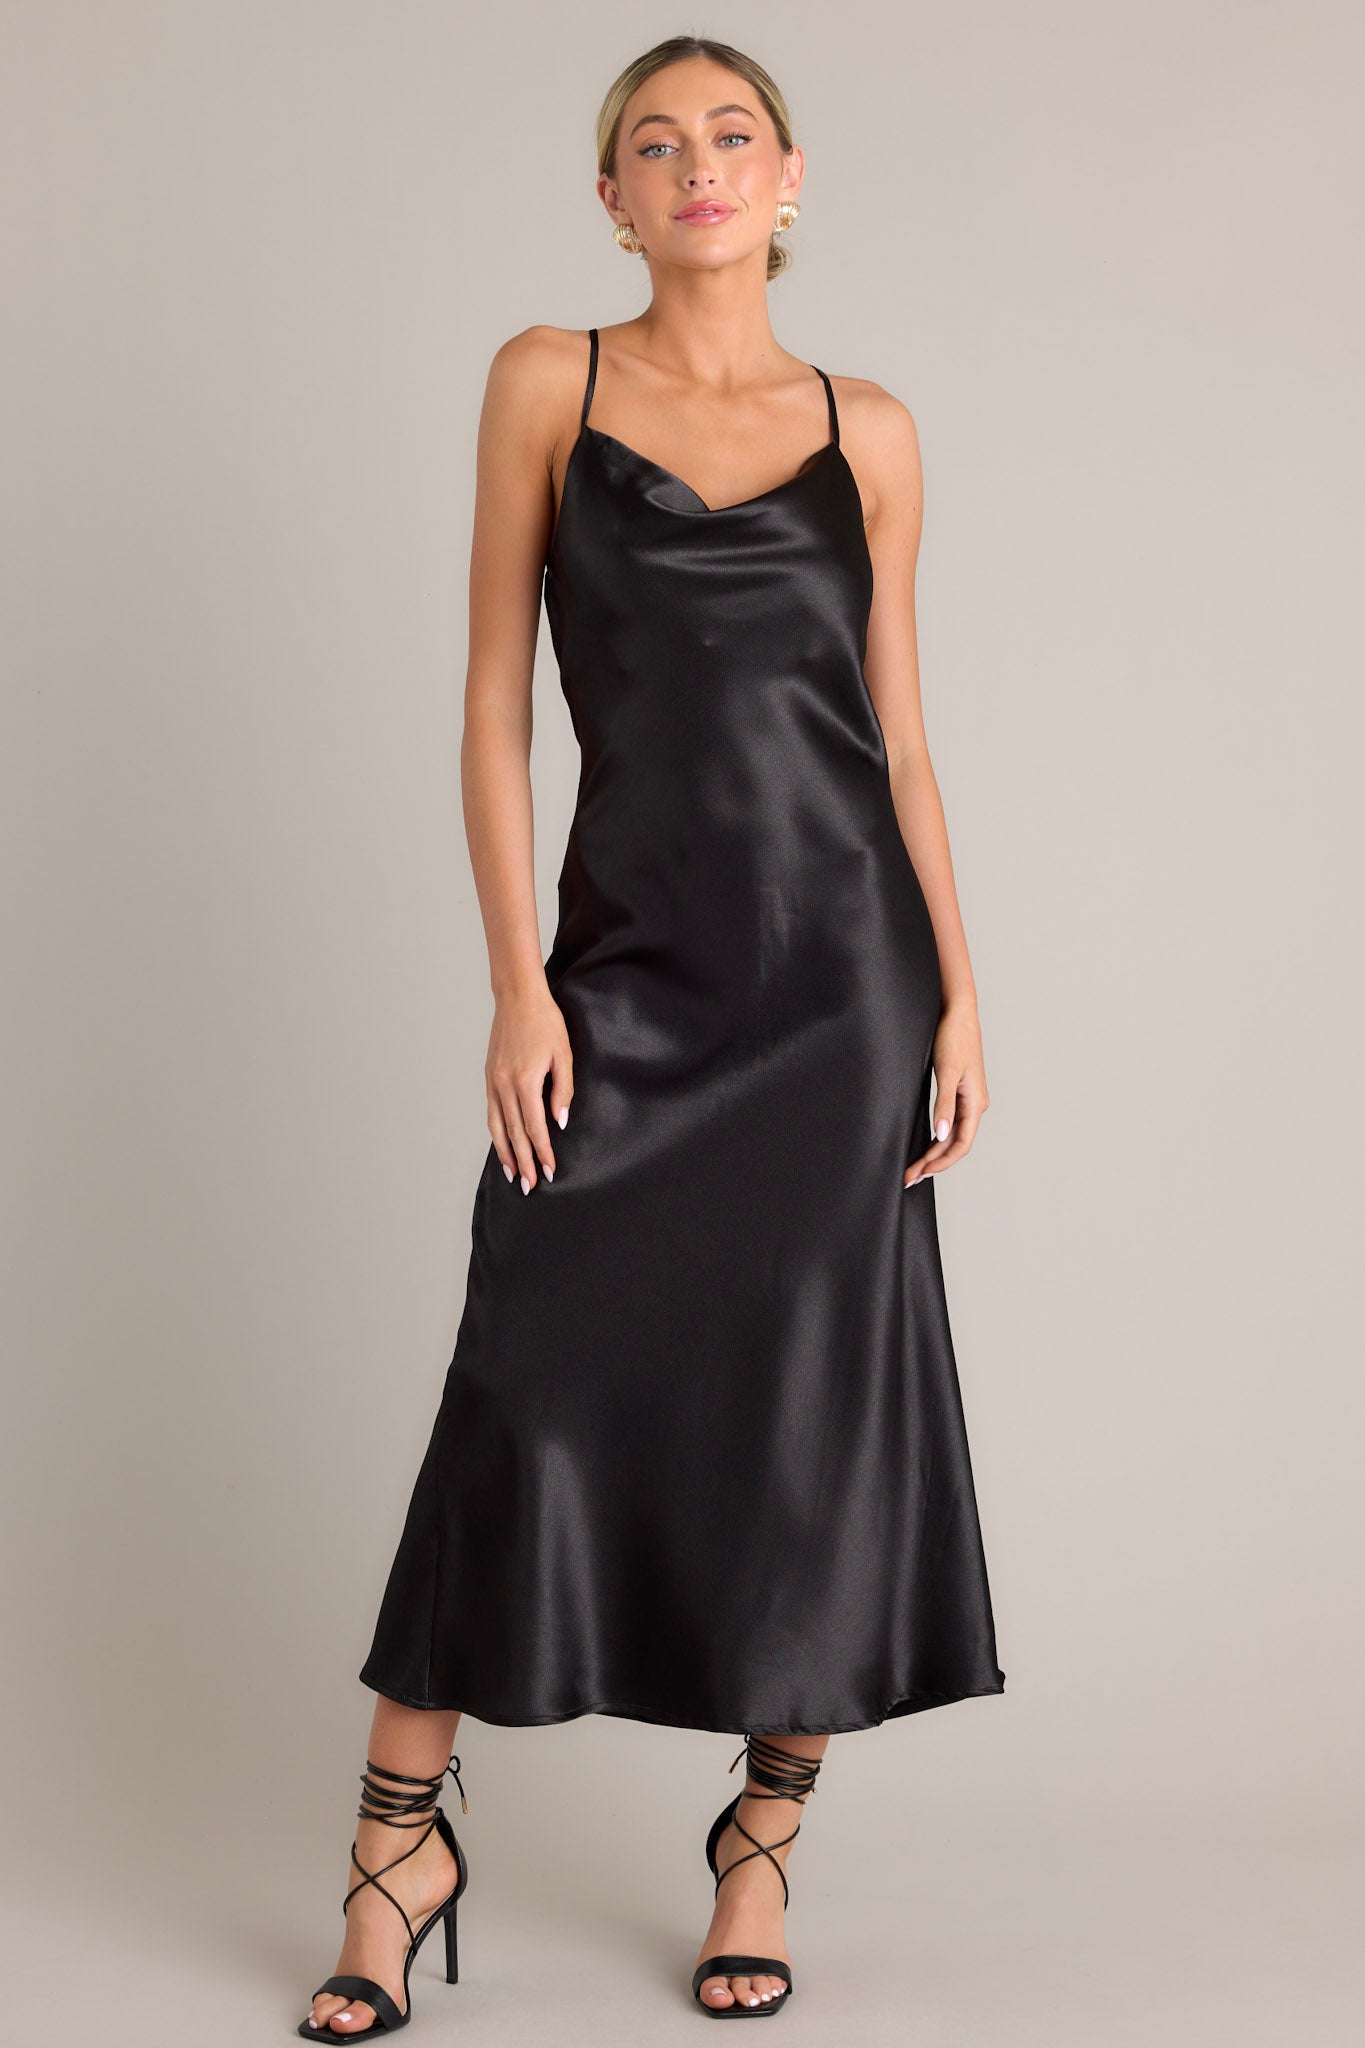 This elegant black dress features a satin-like fabric, adjustable straps, and a cowl neckline